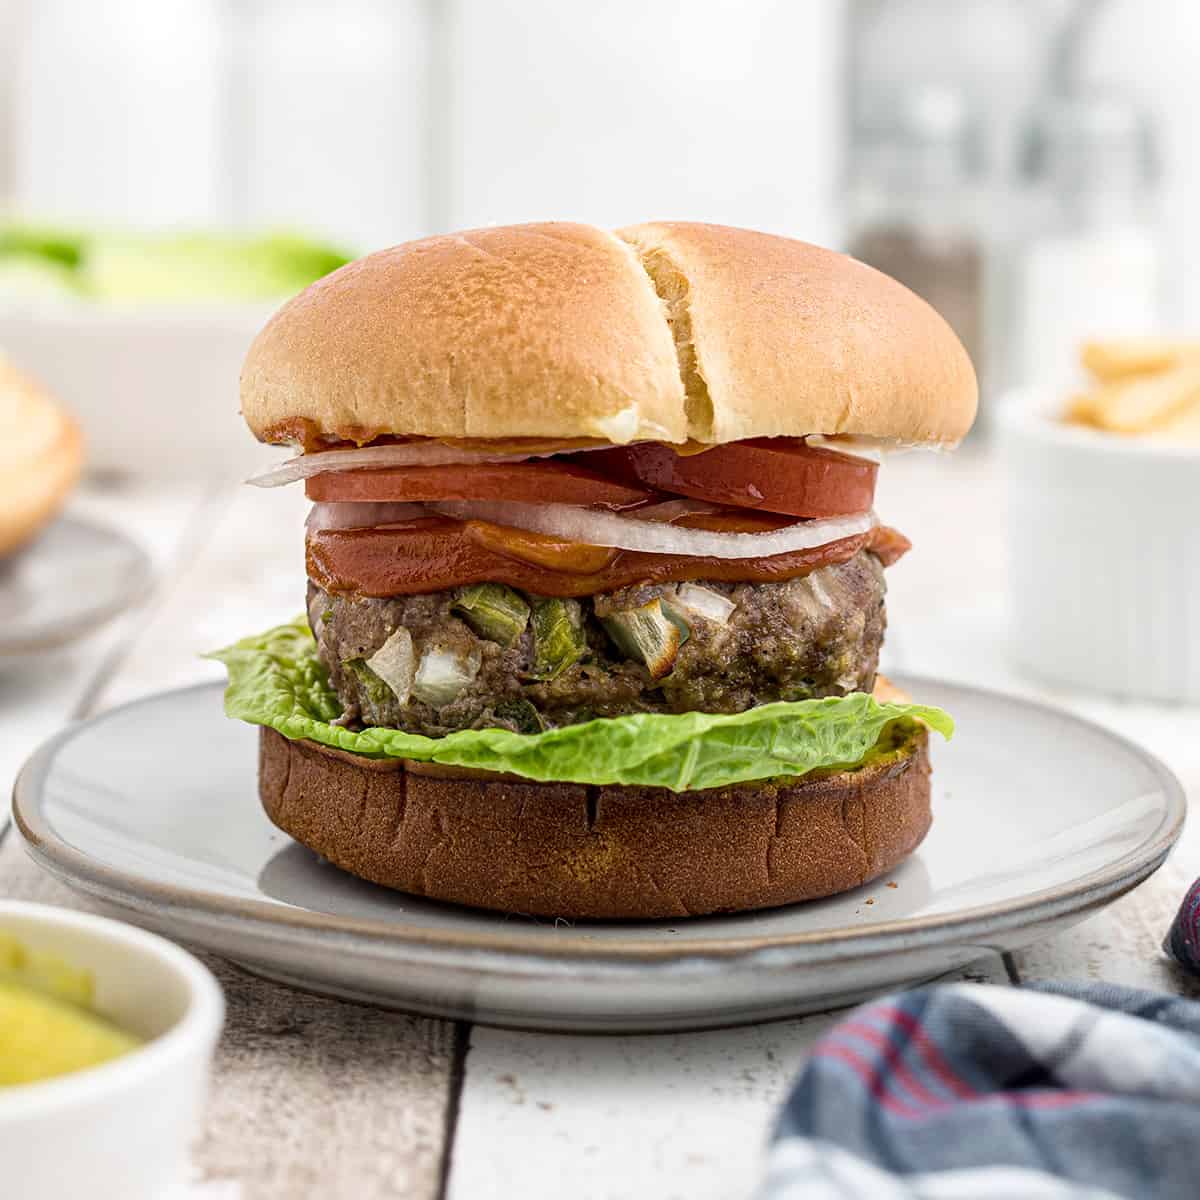 A meatloaf burger on a white serving plate.